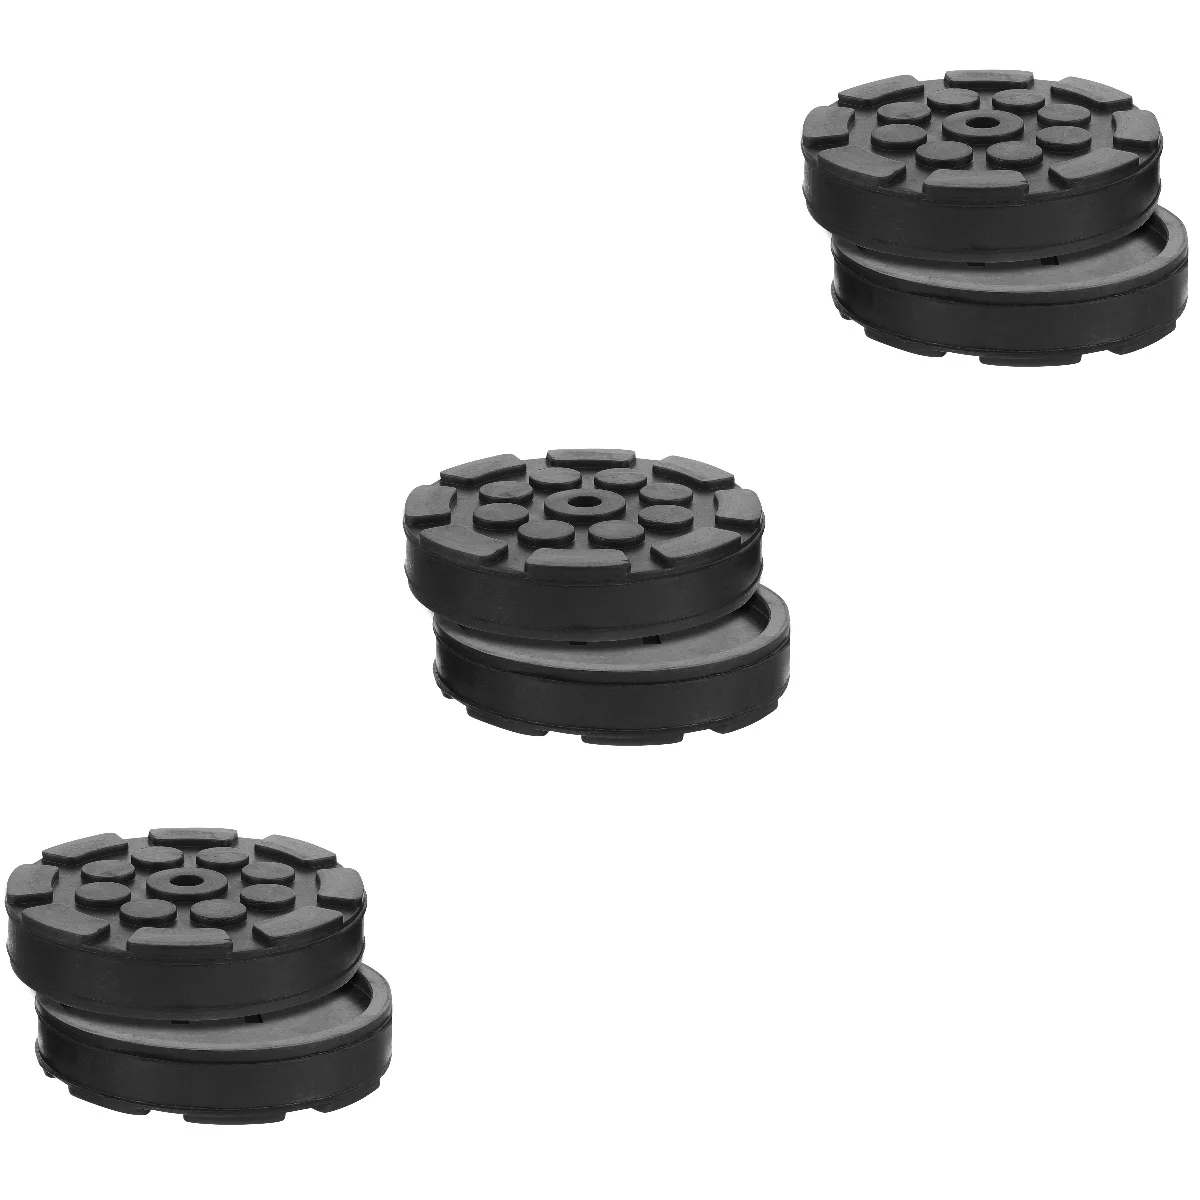 

6 Pcs Rubber Mat Pads Automotive Jack Lift Pinch Weld Car Jacking Adapter Floor Disk Slotted Automobile Stand